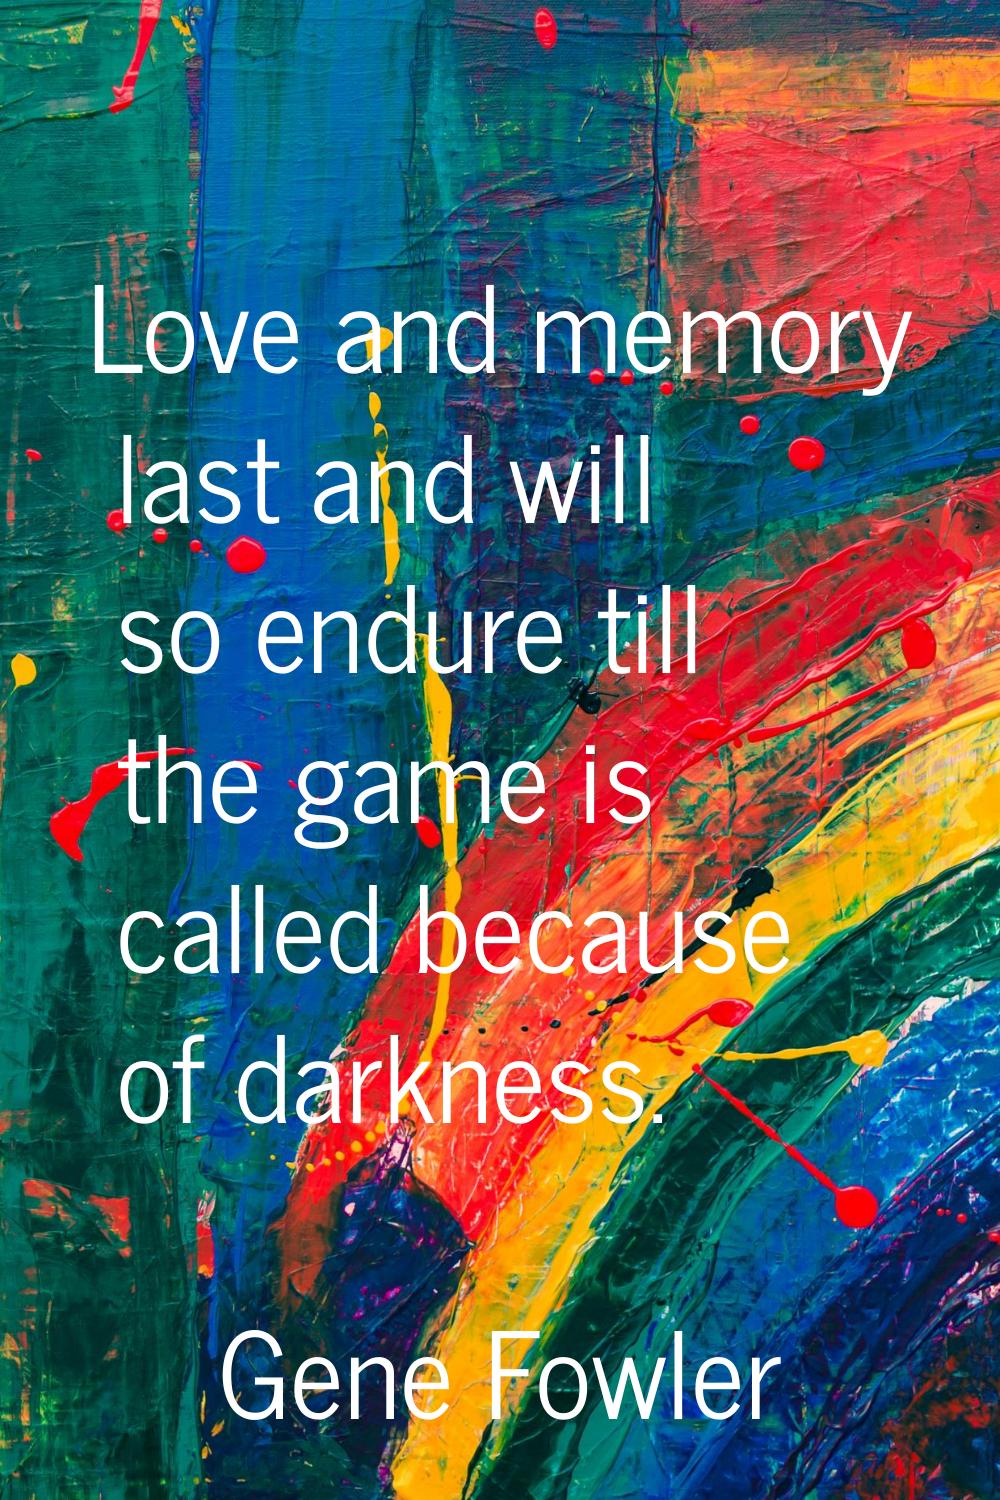 Love and memory last and will so endure till the game is called because of darkness.